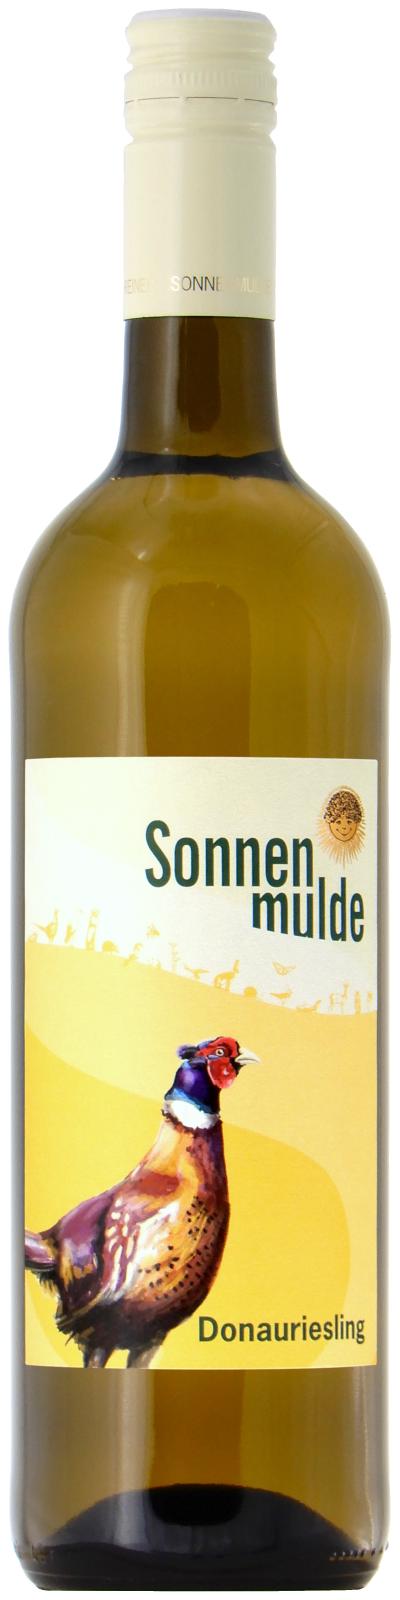 A bottle of Donauriesling